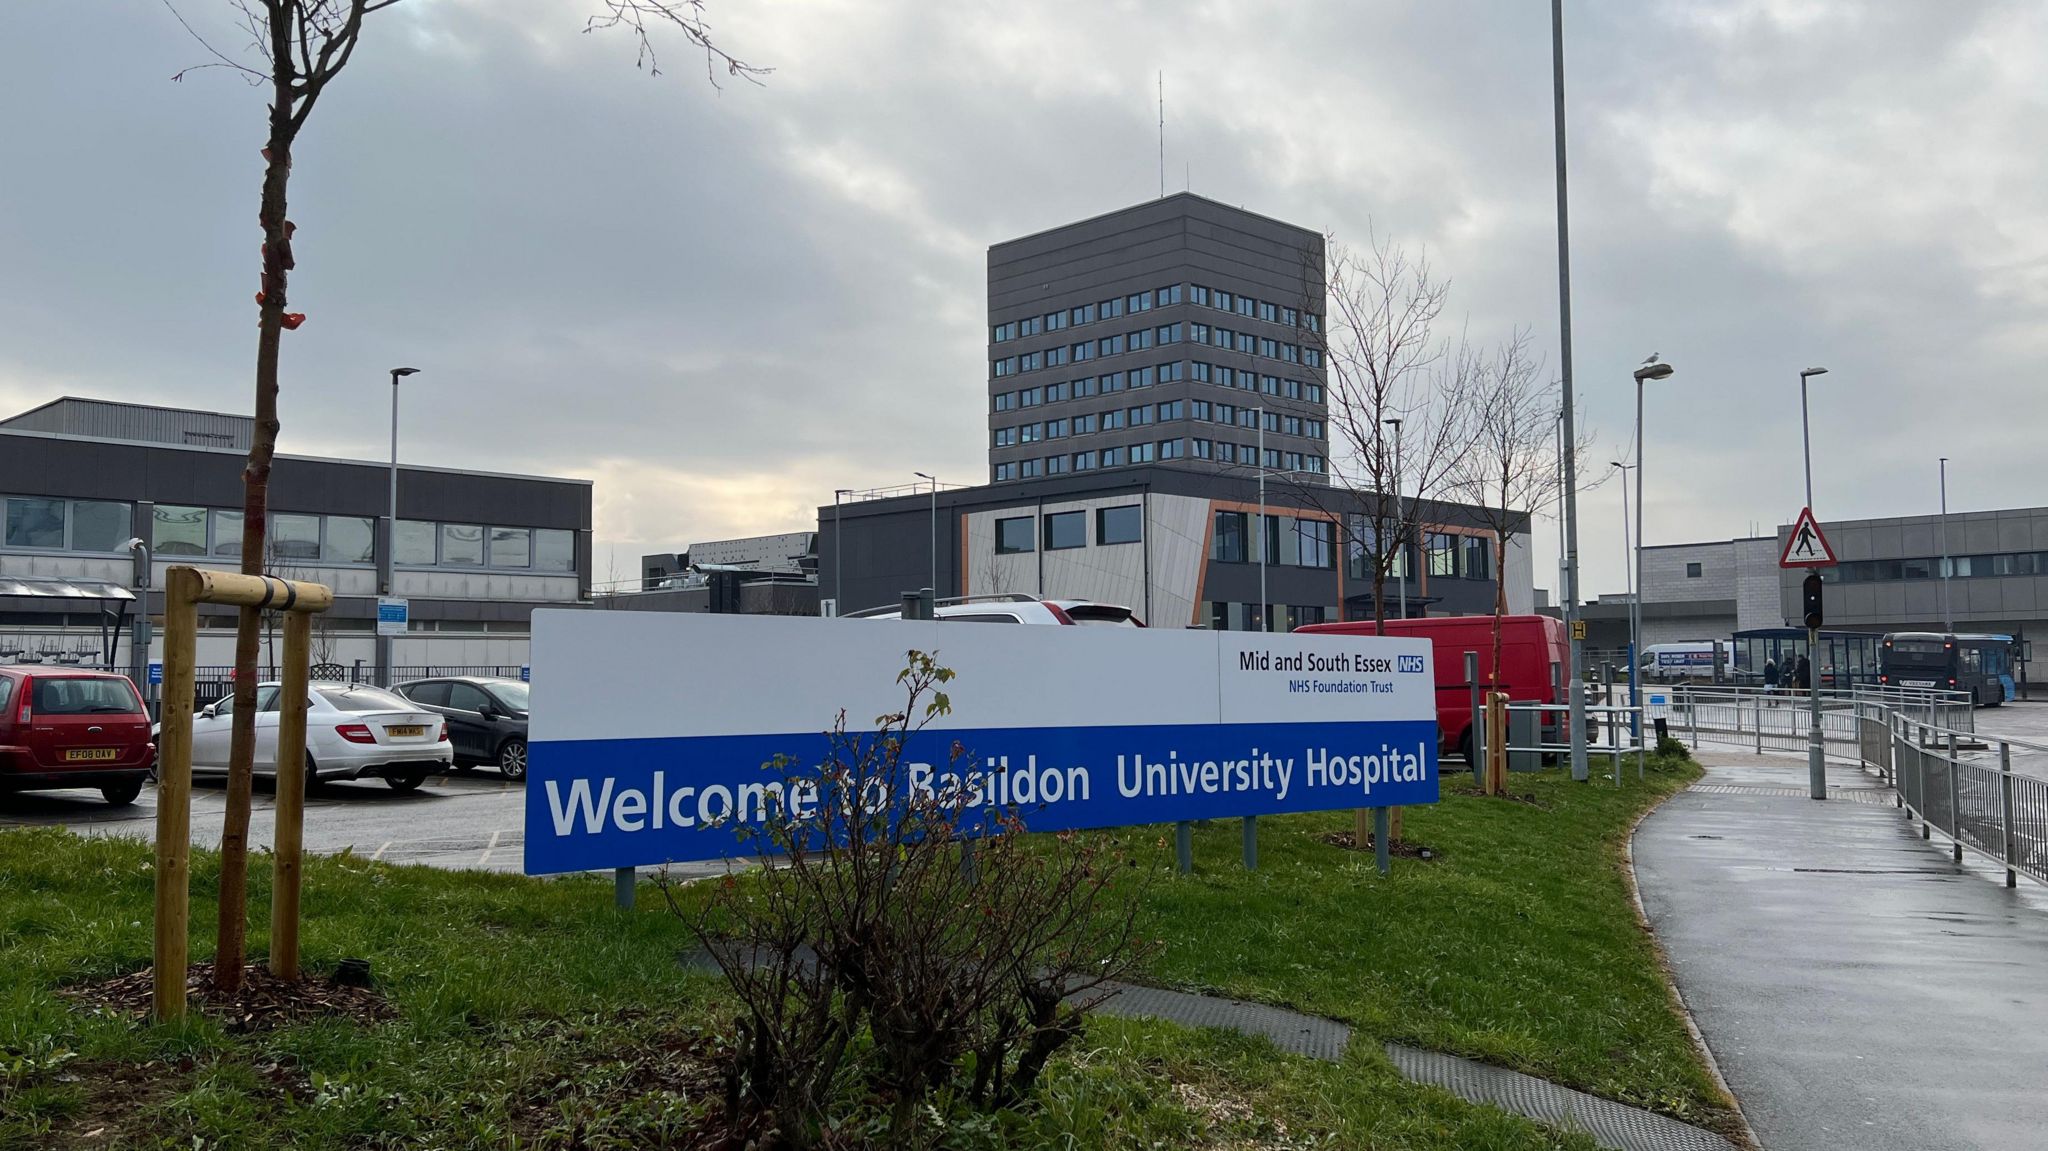 Basildon hospital, with its front entrance sign visible